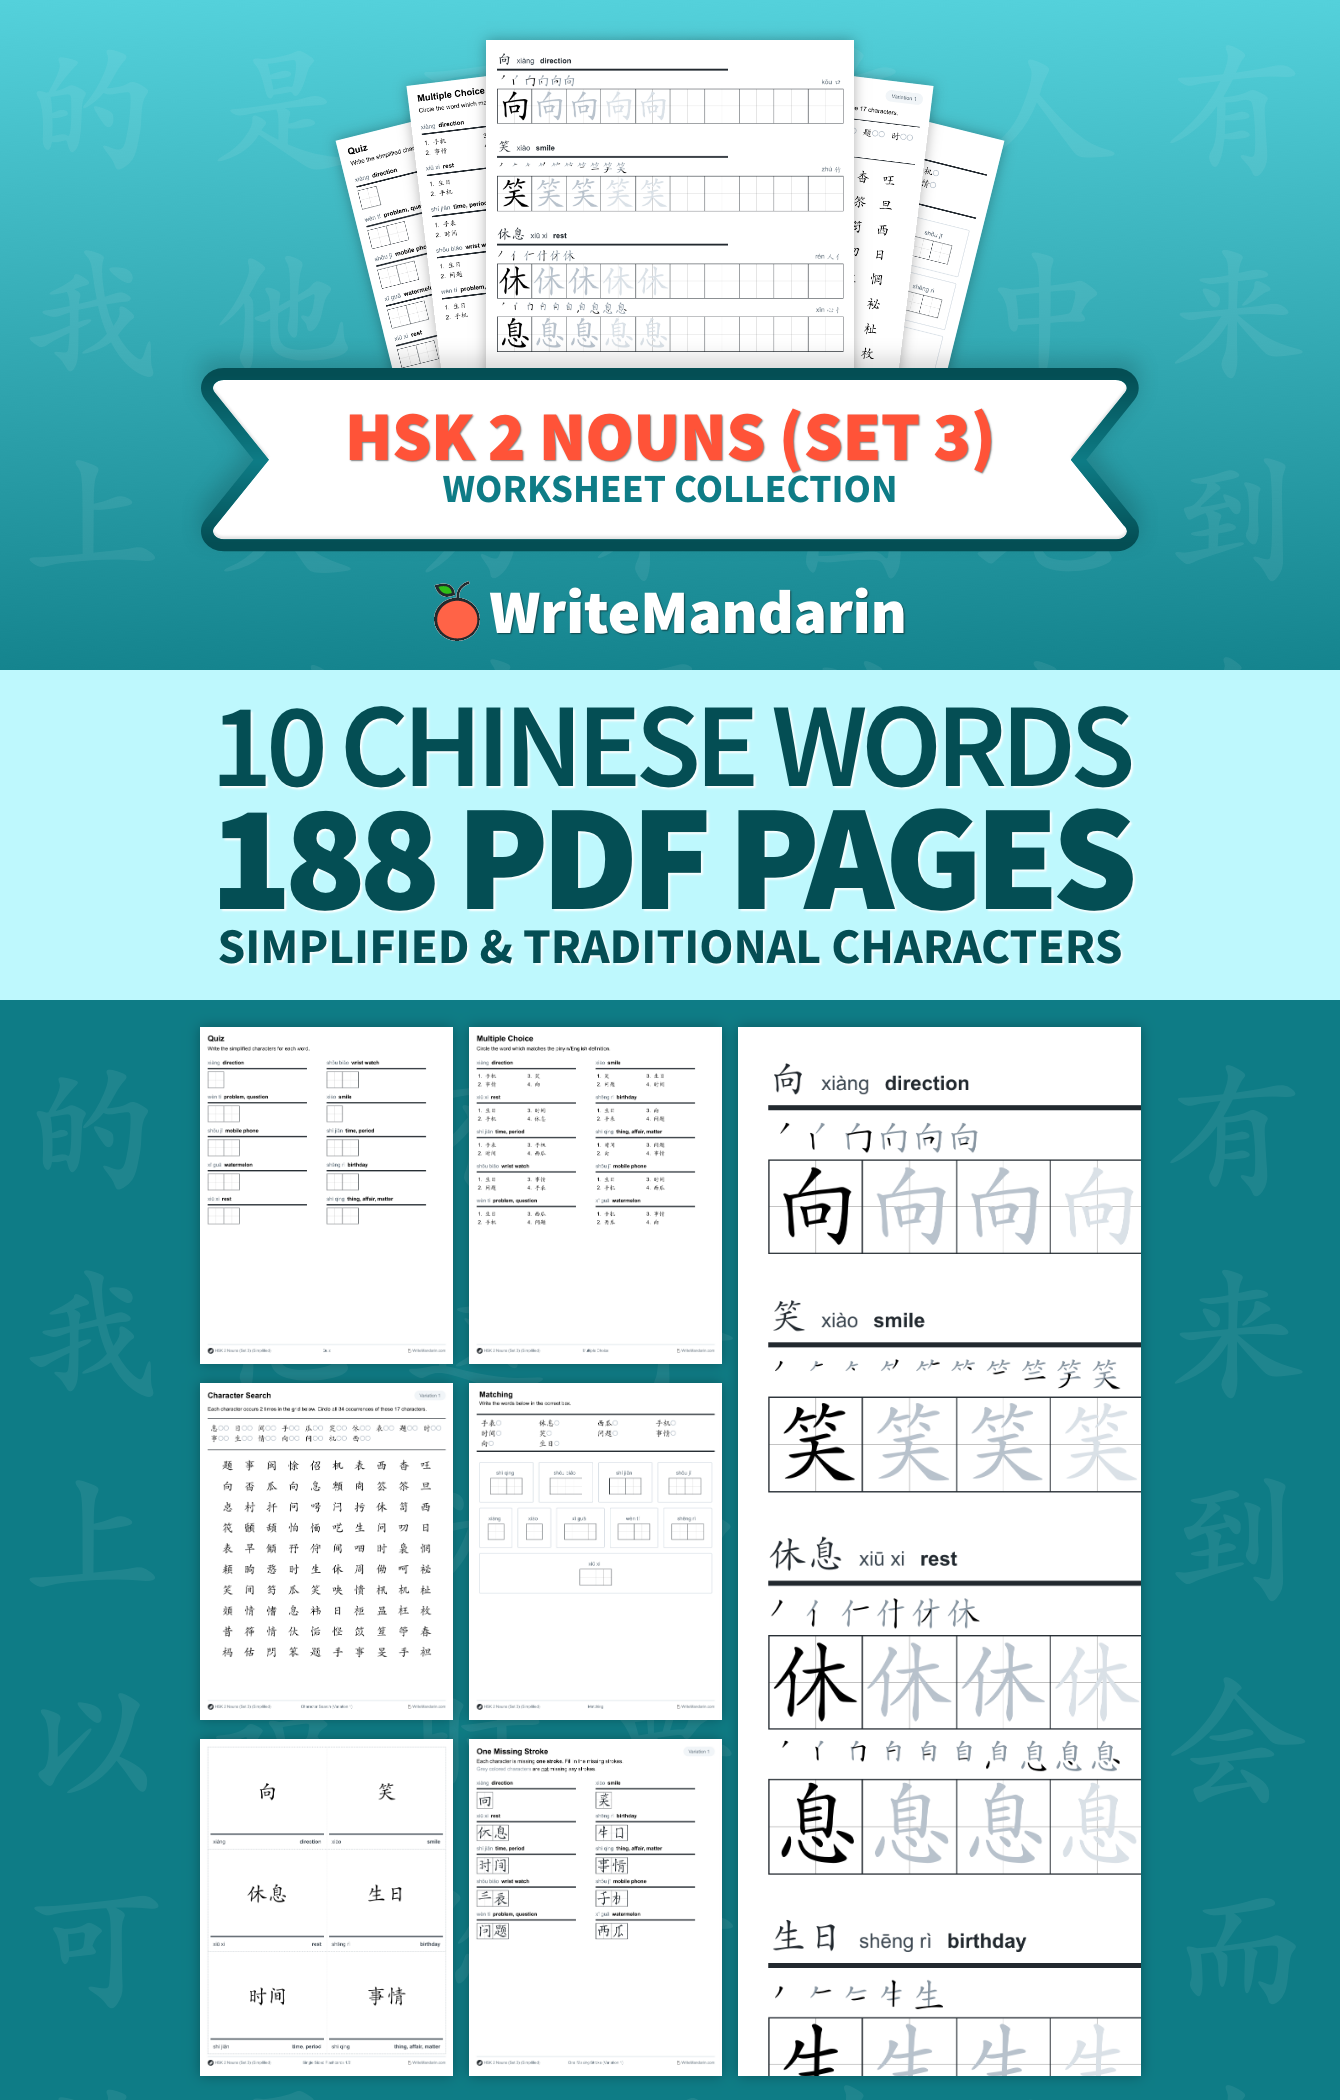 Preview image of HSK 2 Nouns (Set 3) worksheet collection